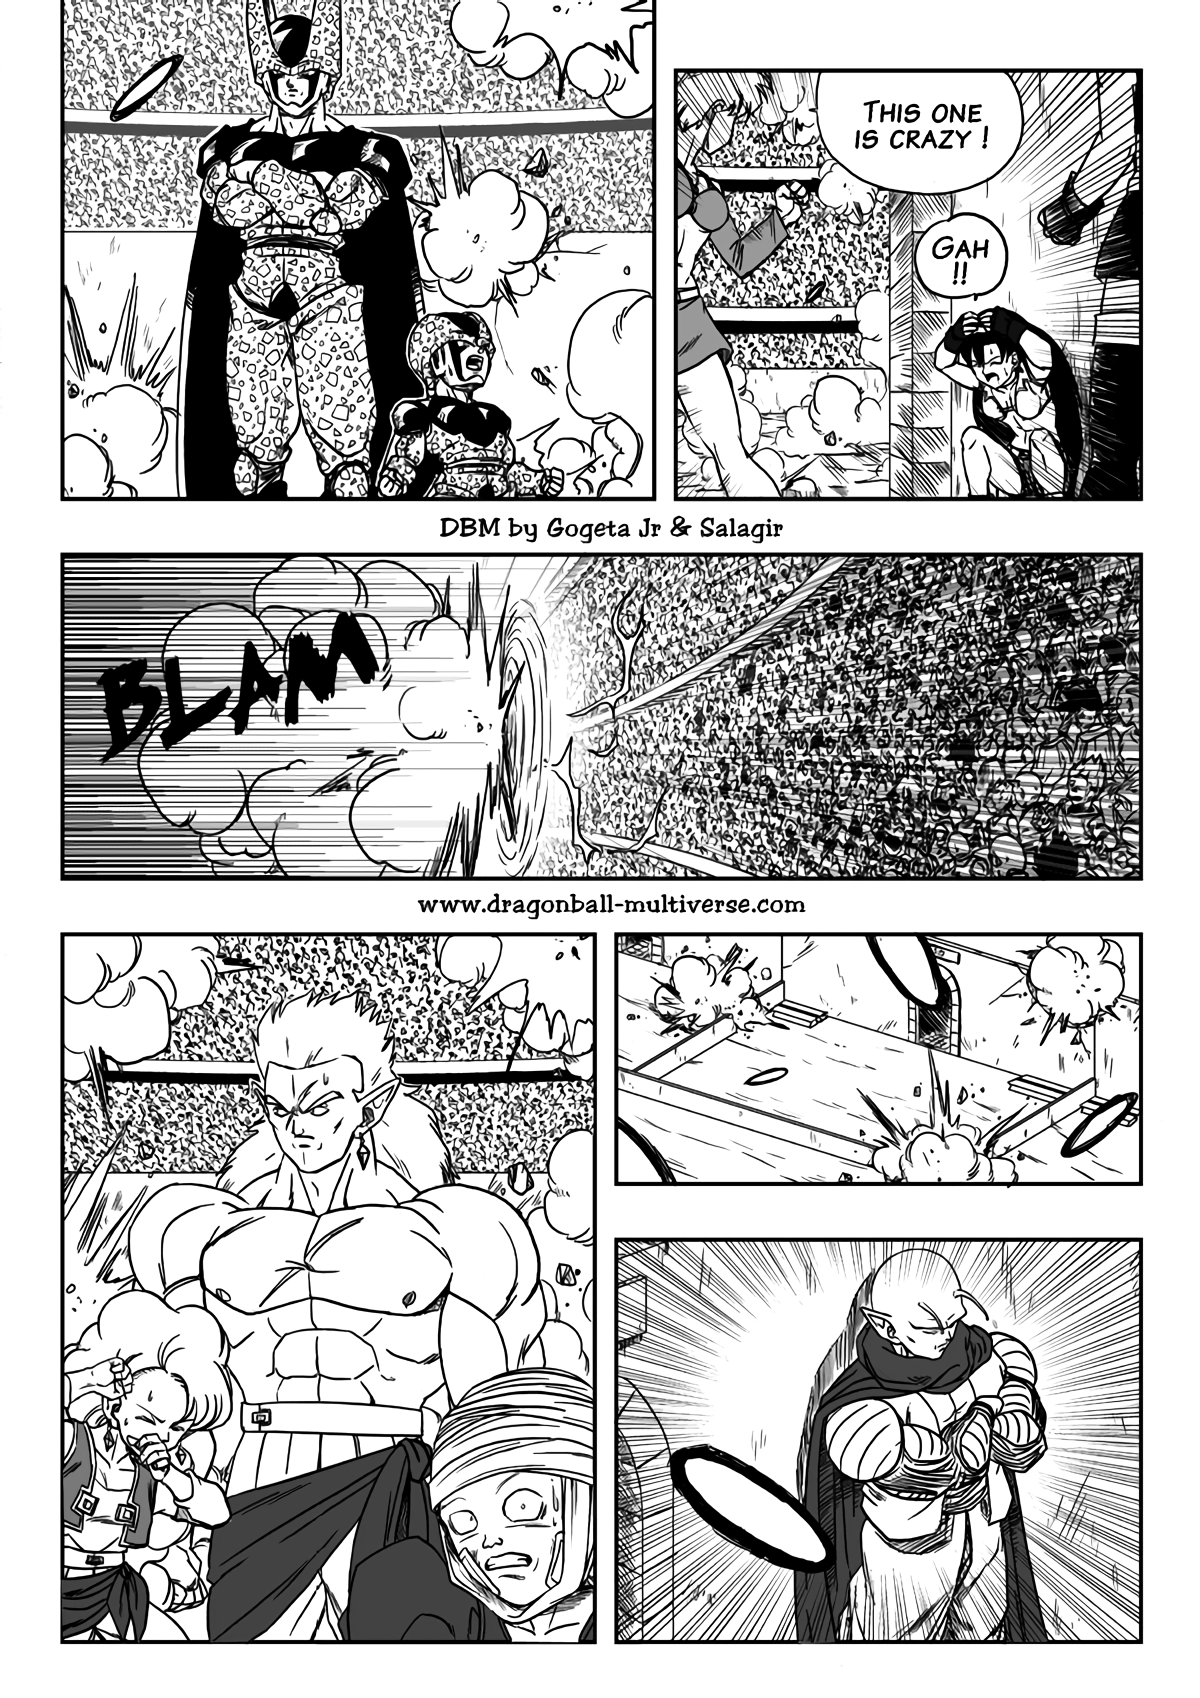 Universe 1 - How it all began - Chapter 83, Page 1918 - DBMultiverse